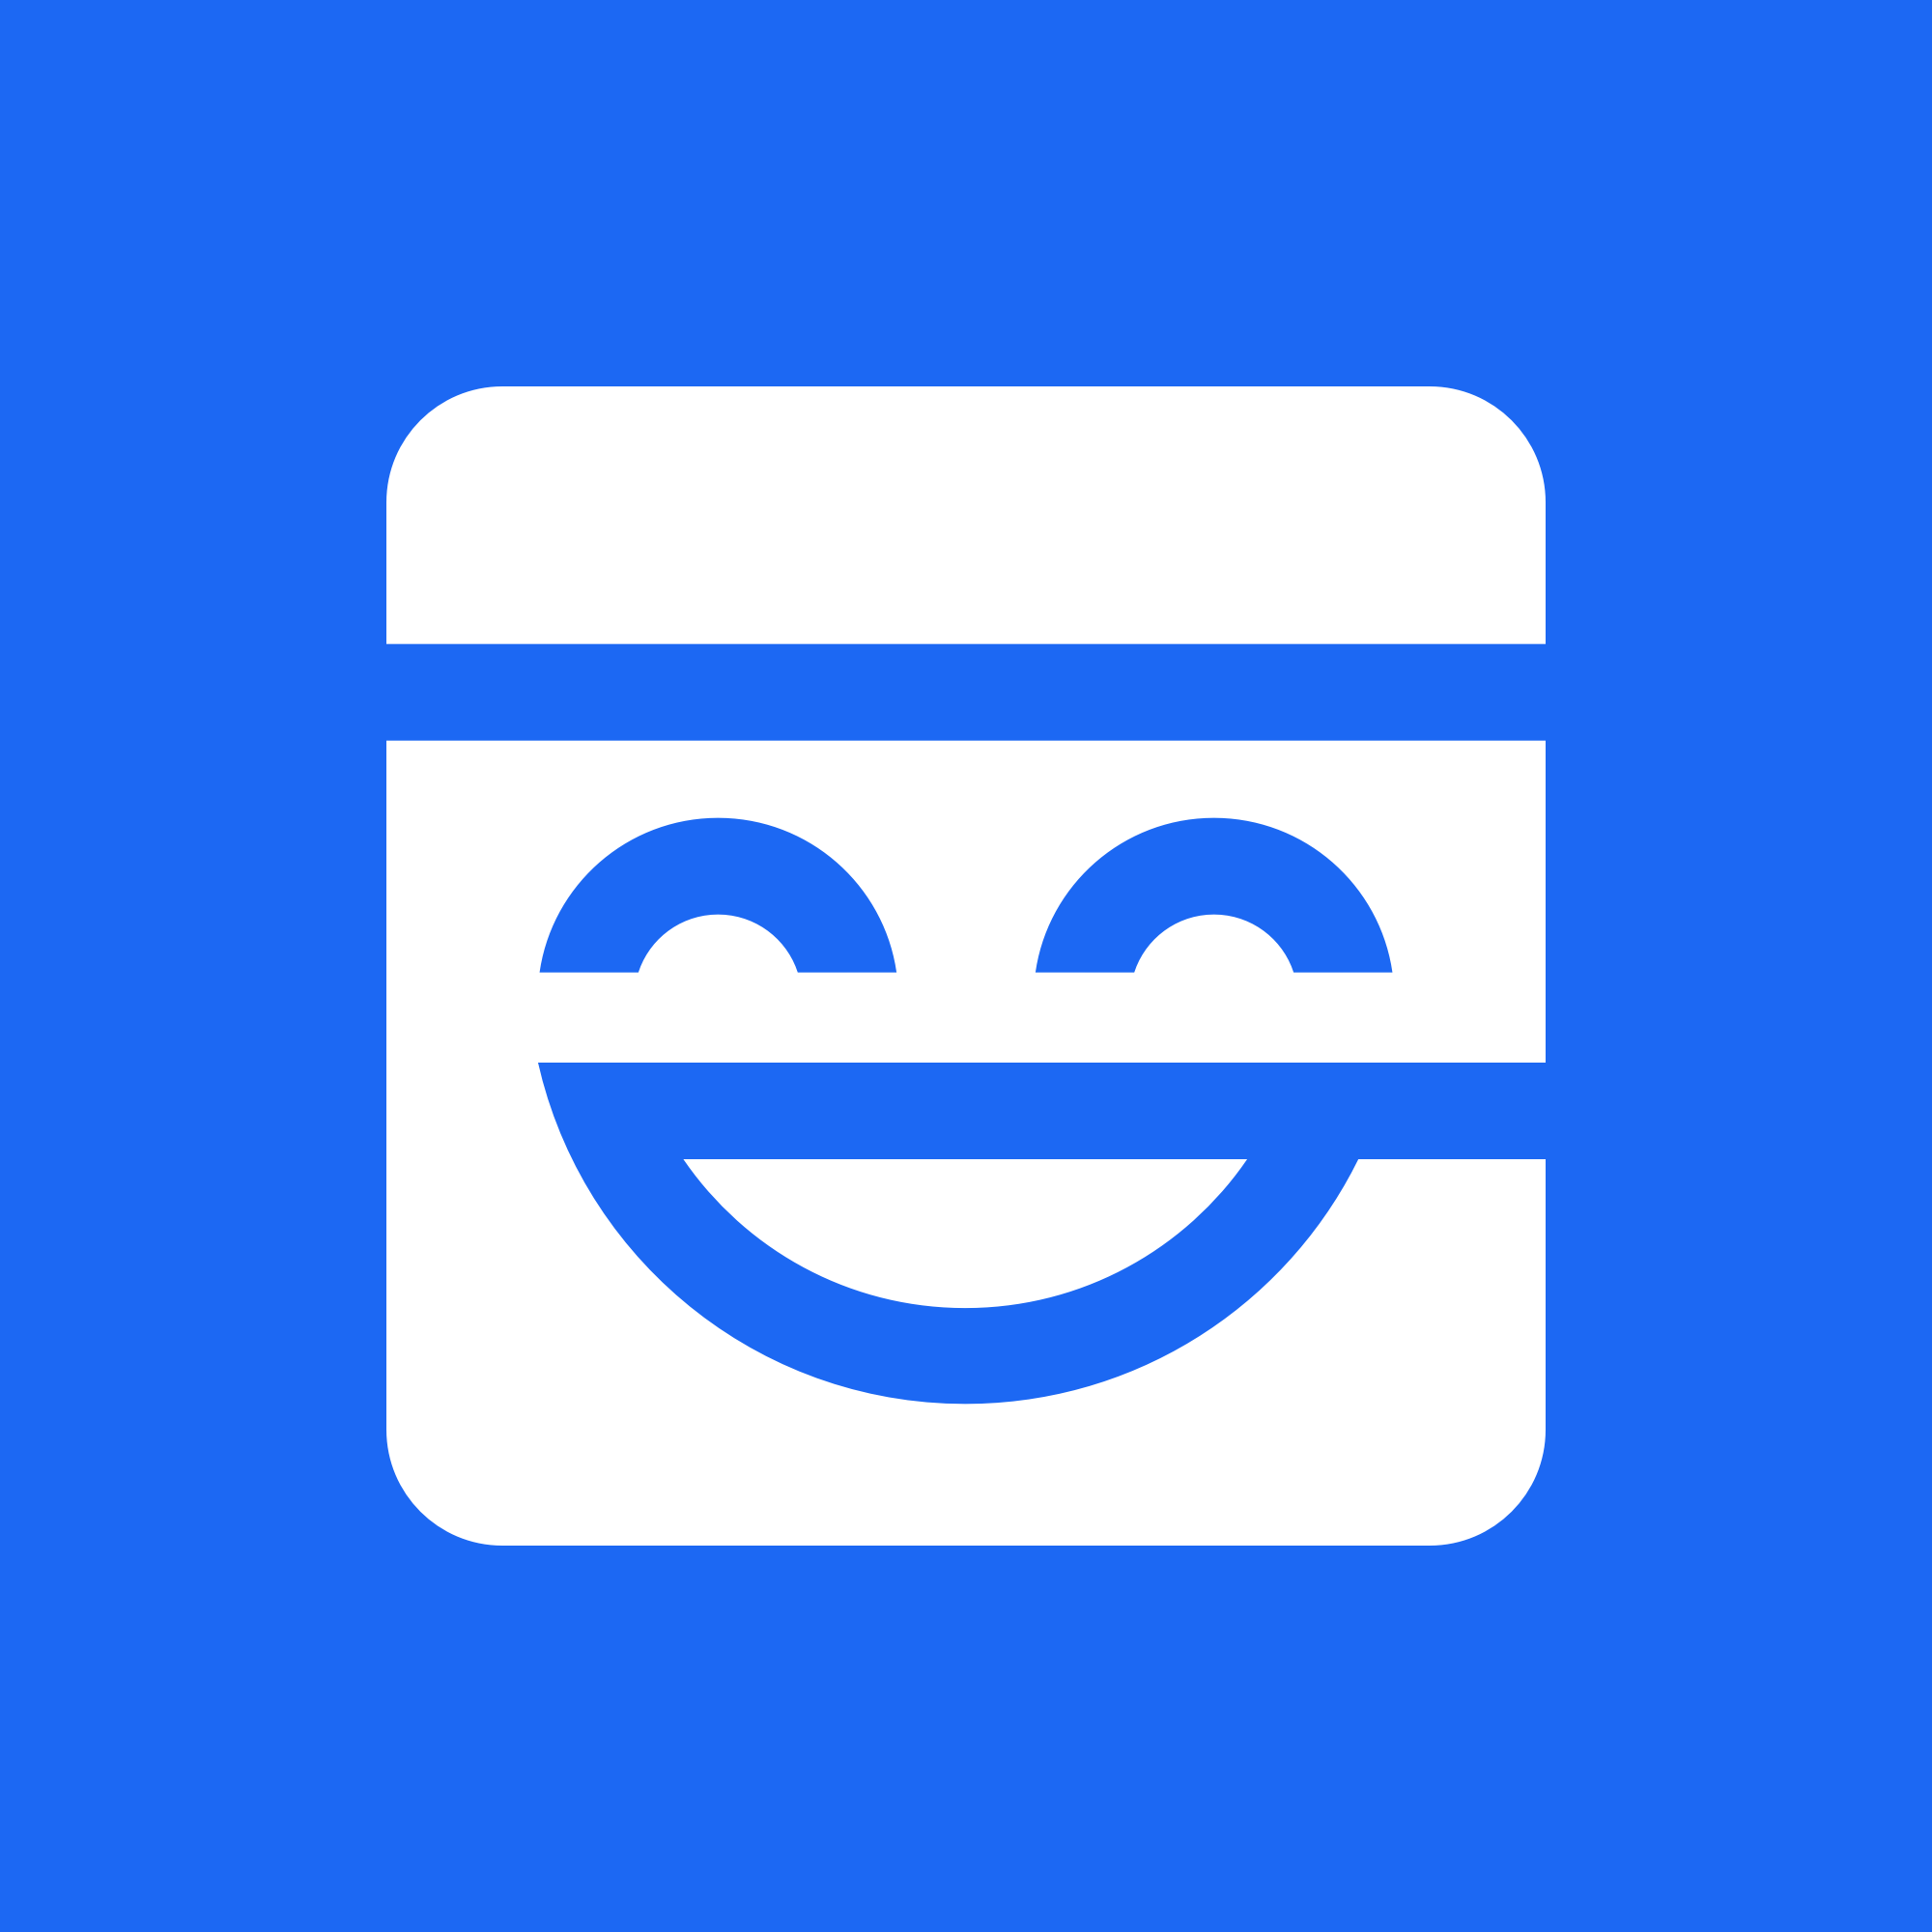 Grin (GRIN) Logo .SVG and .PNG Files Download